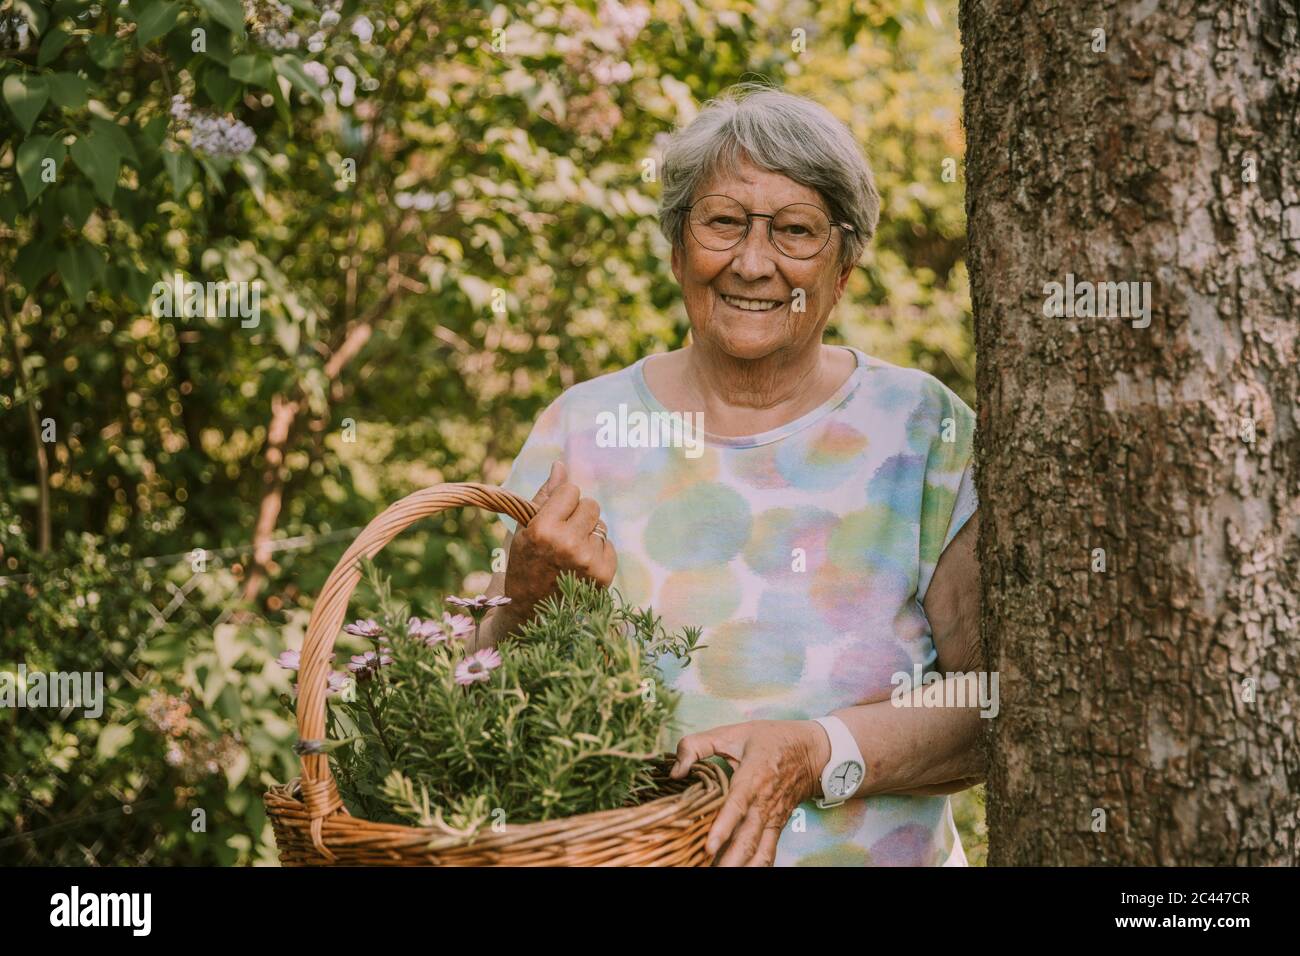 Smiling retired senior woman holding basket with flowers and herbs while standing by tree at garden Stock Photo